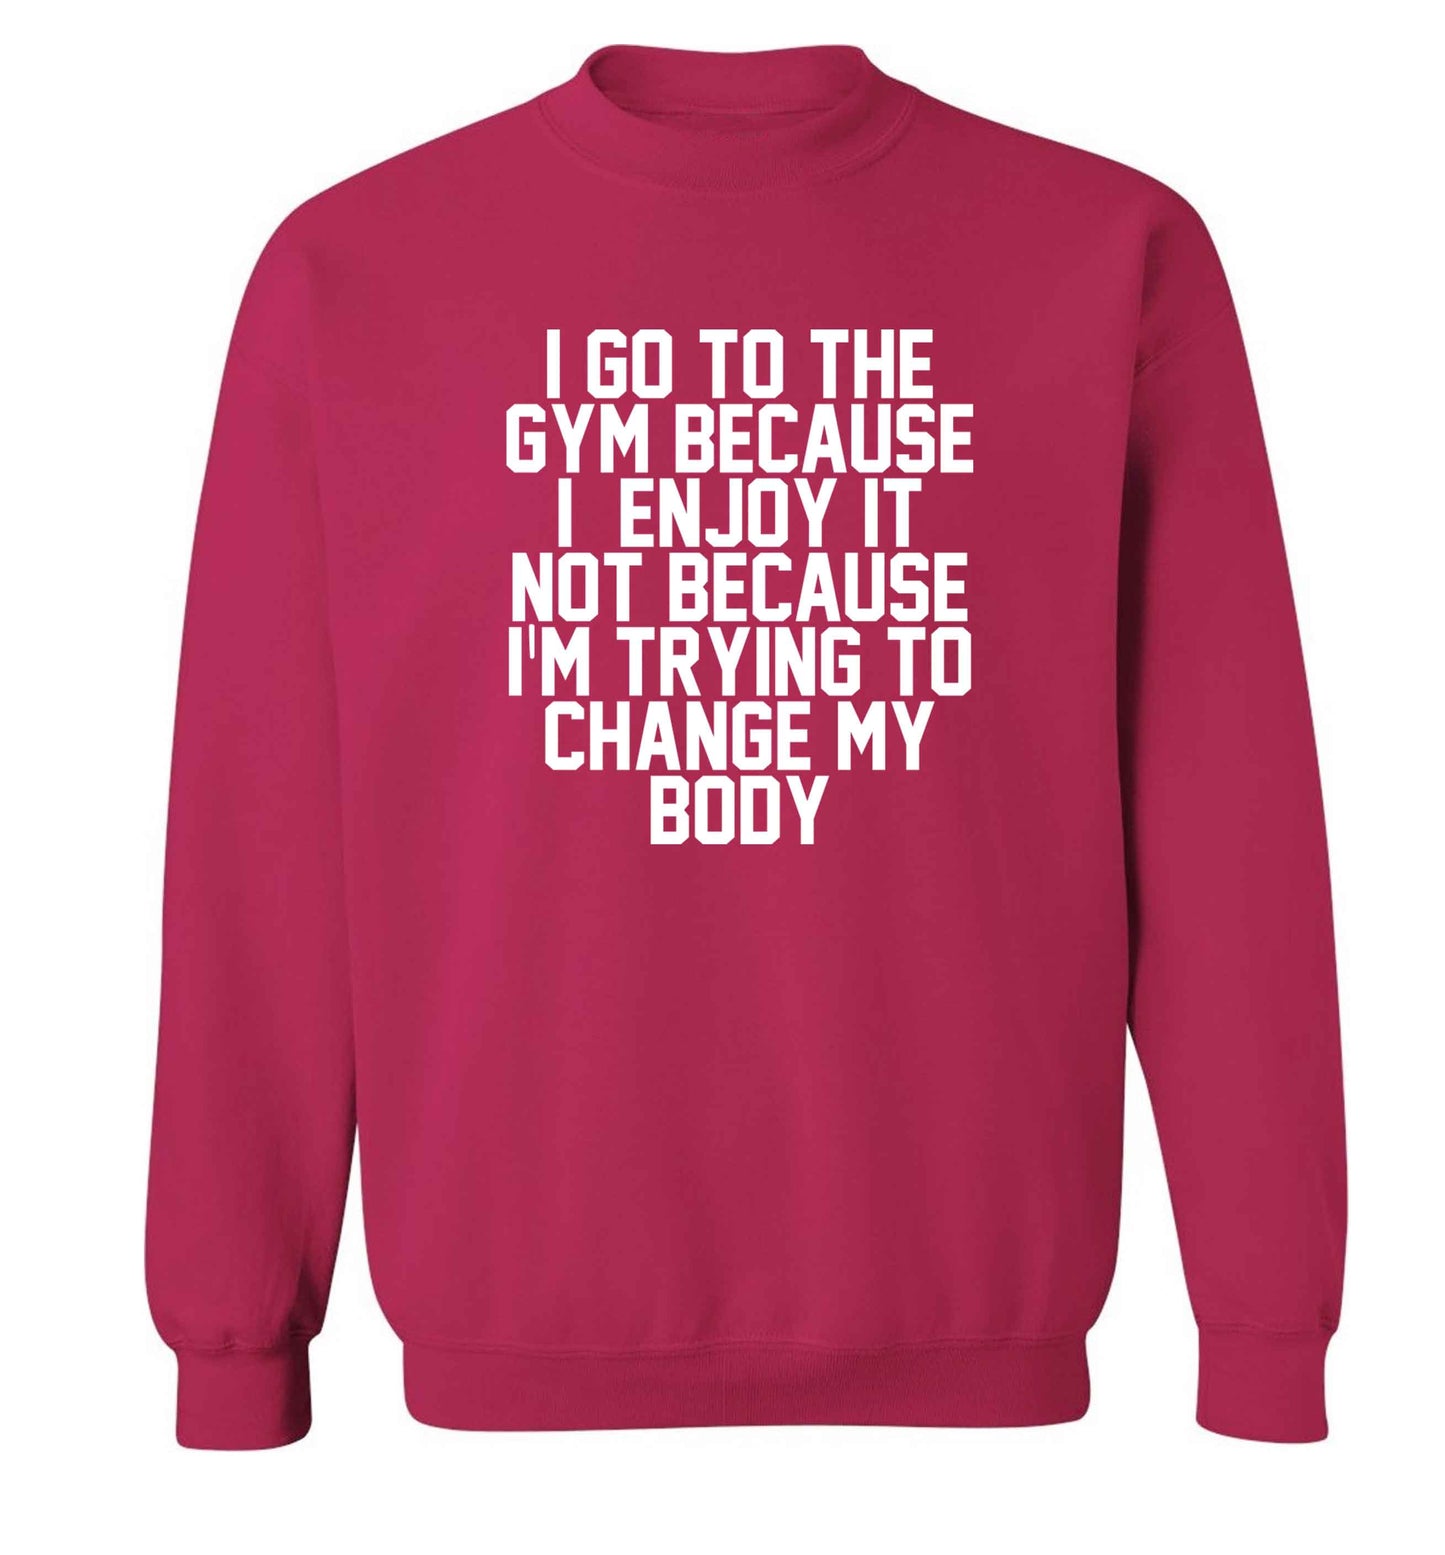 I go to the gym because I enjoy it not because I'm trying to change my body adult's unisex pink sweater 2XL